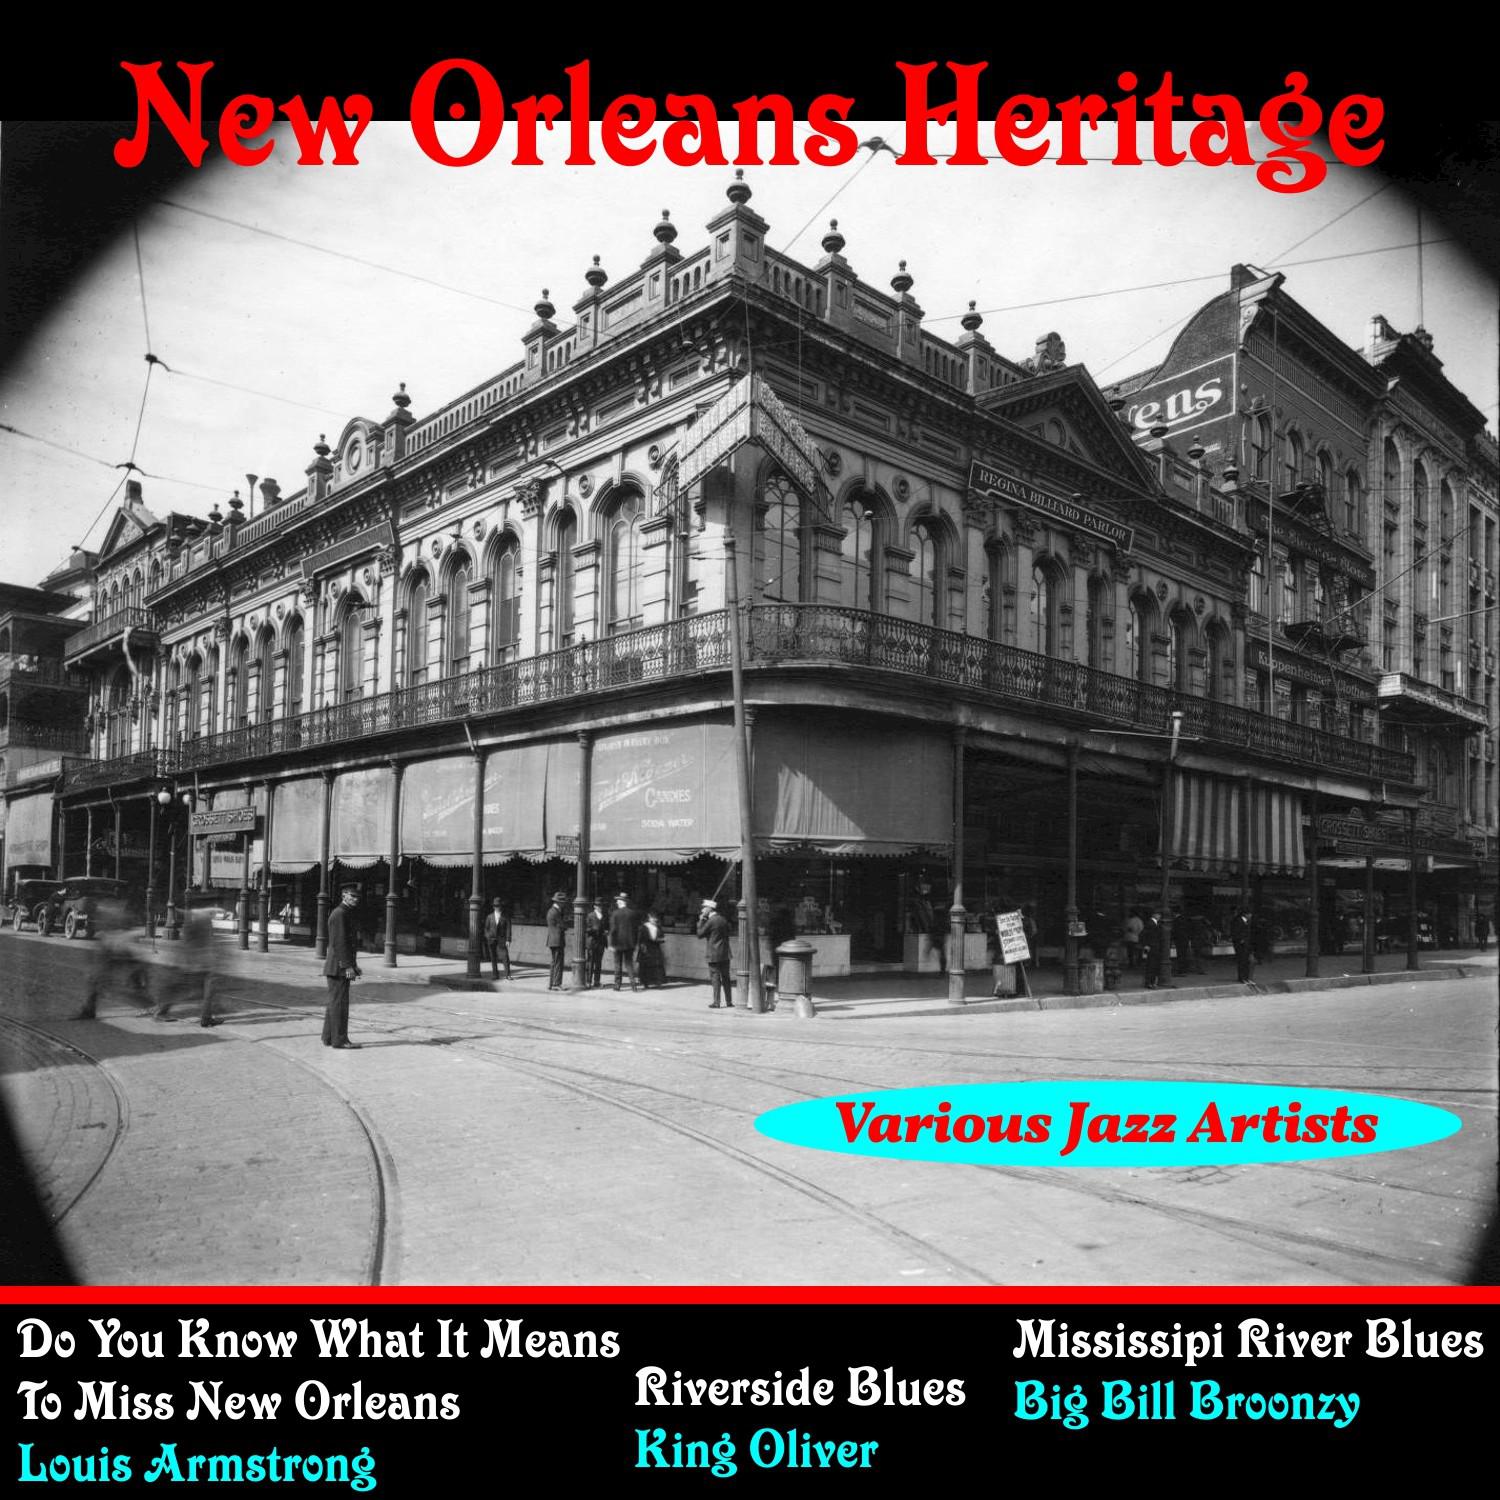 New Orleans Heritage